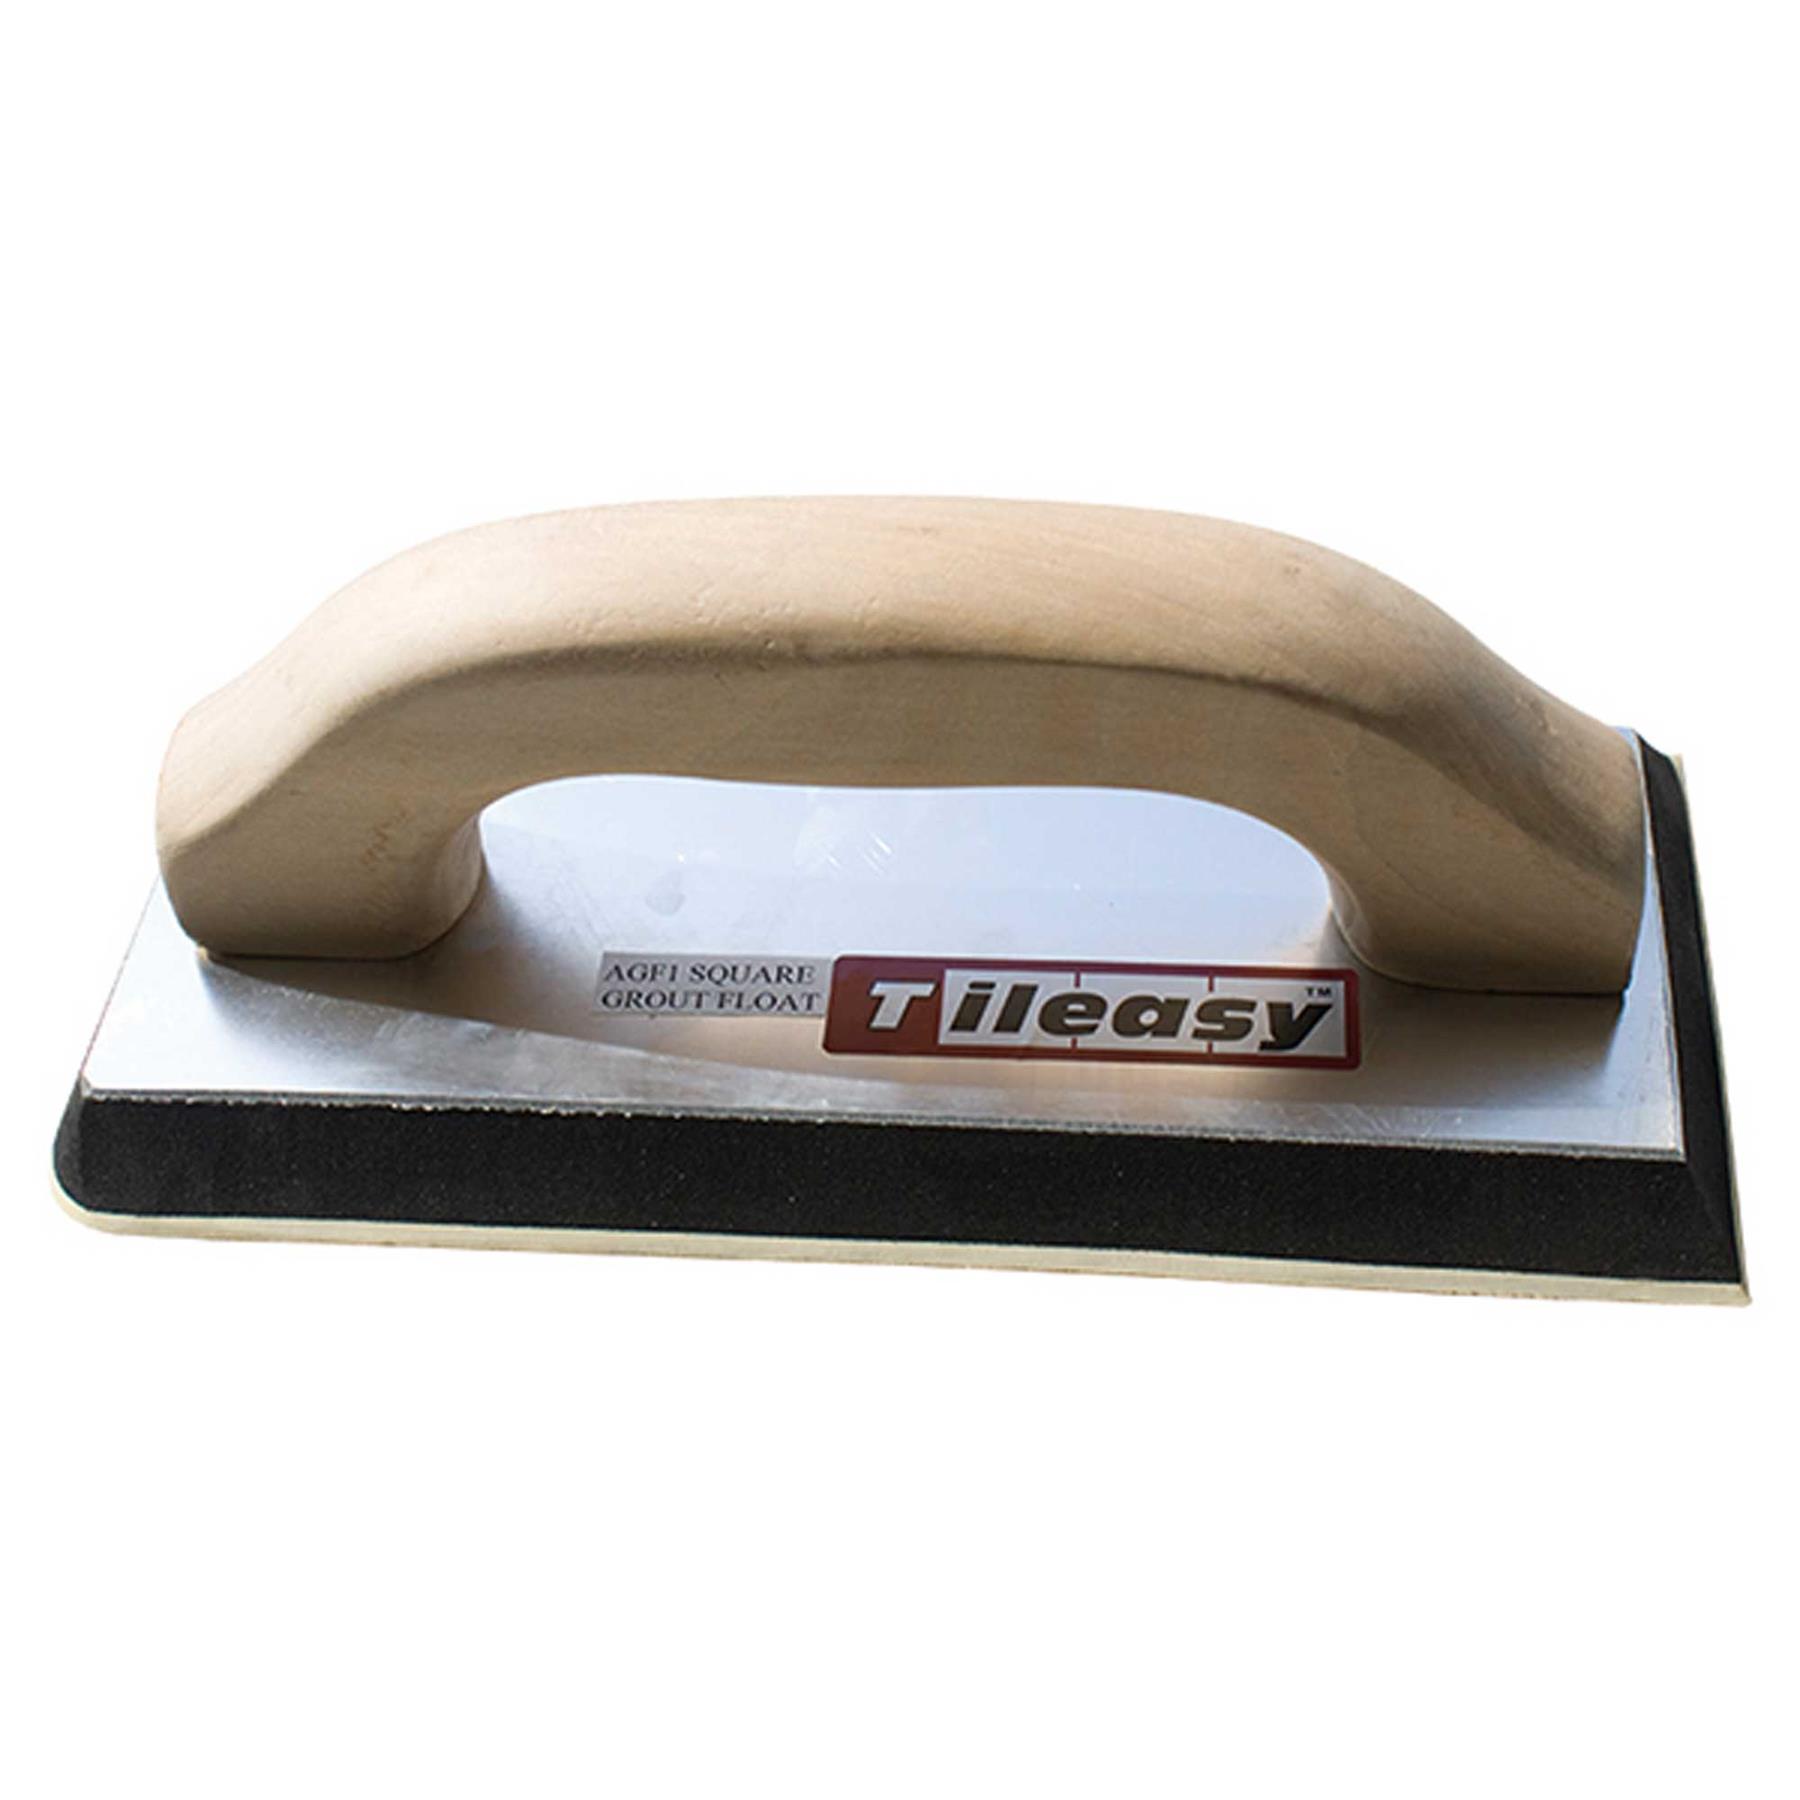 Tileasy American Grout Float AGF1